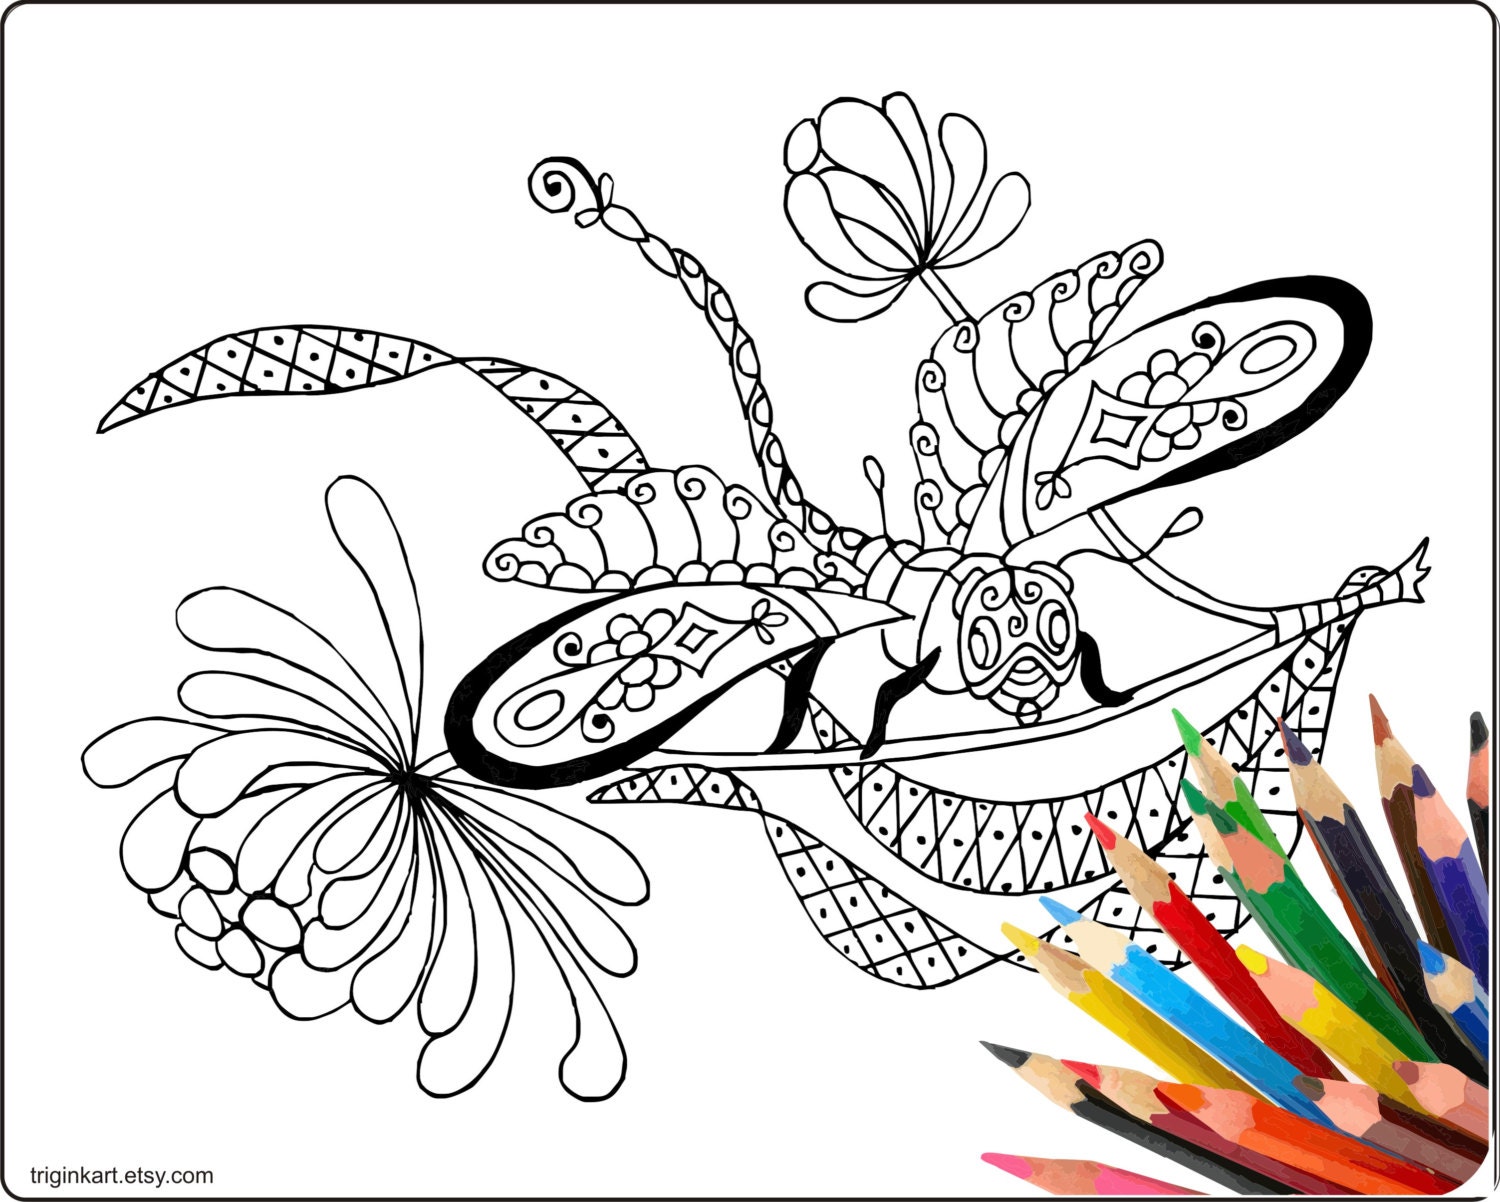 Dragonfly Adult coloring page